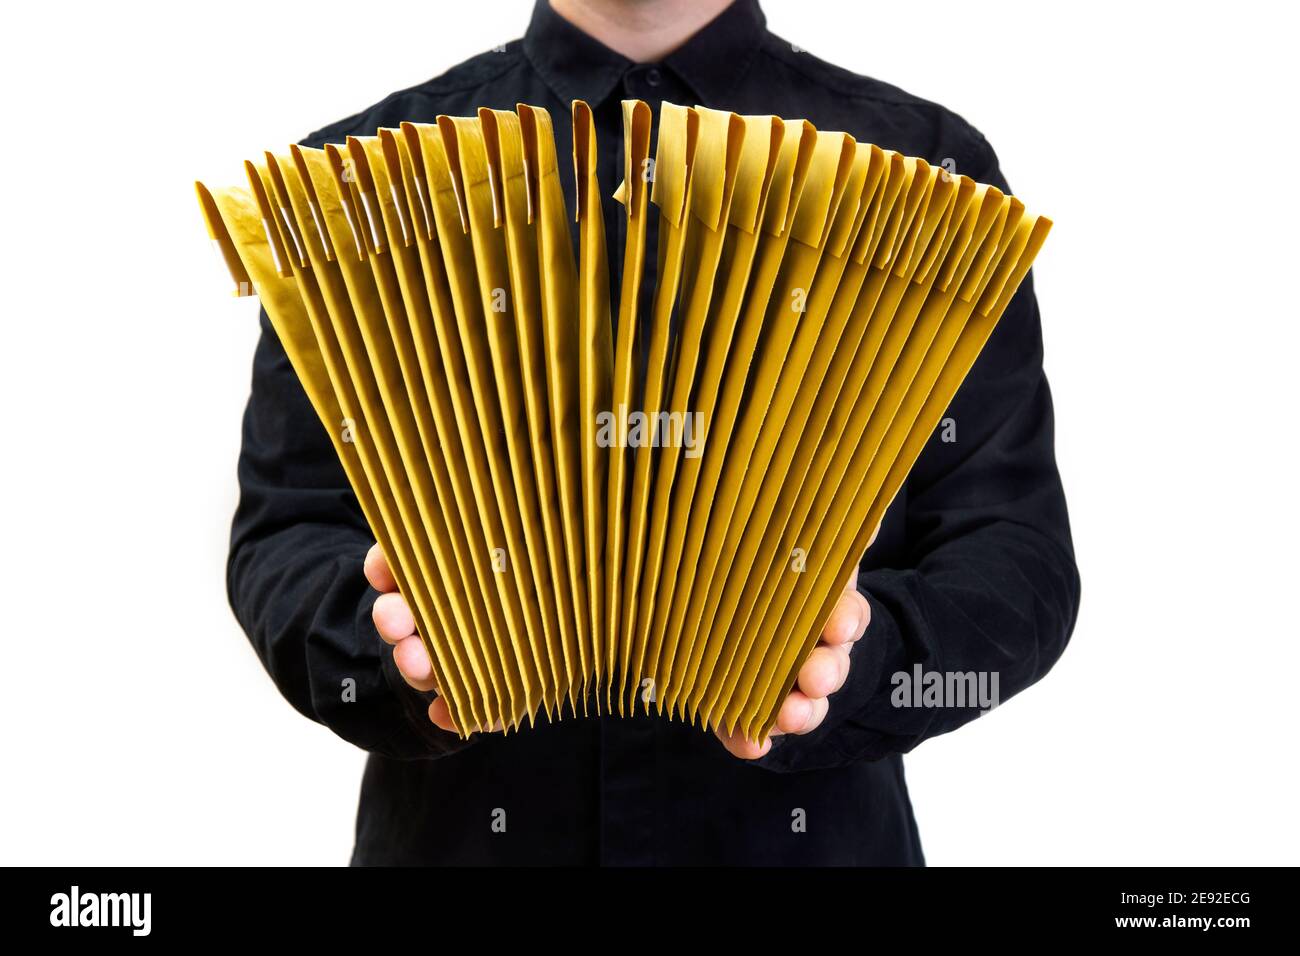 Man in black uniform holding a stack of yellow bubble envelopes isolated on white Stock Photo